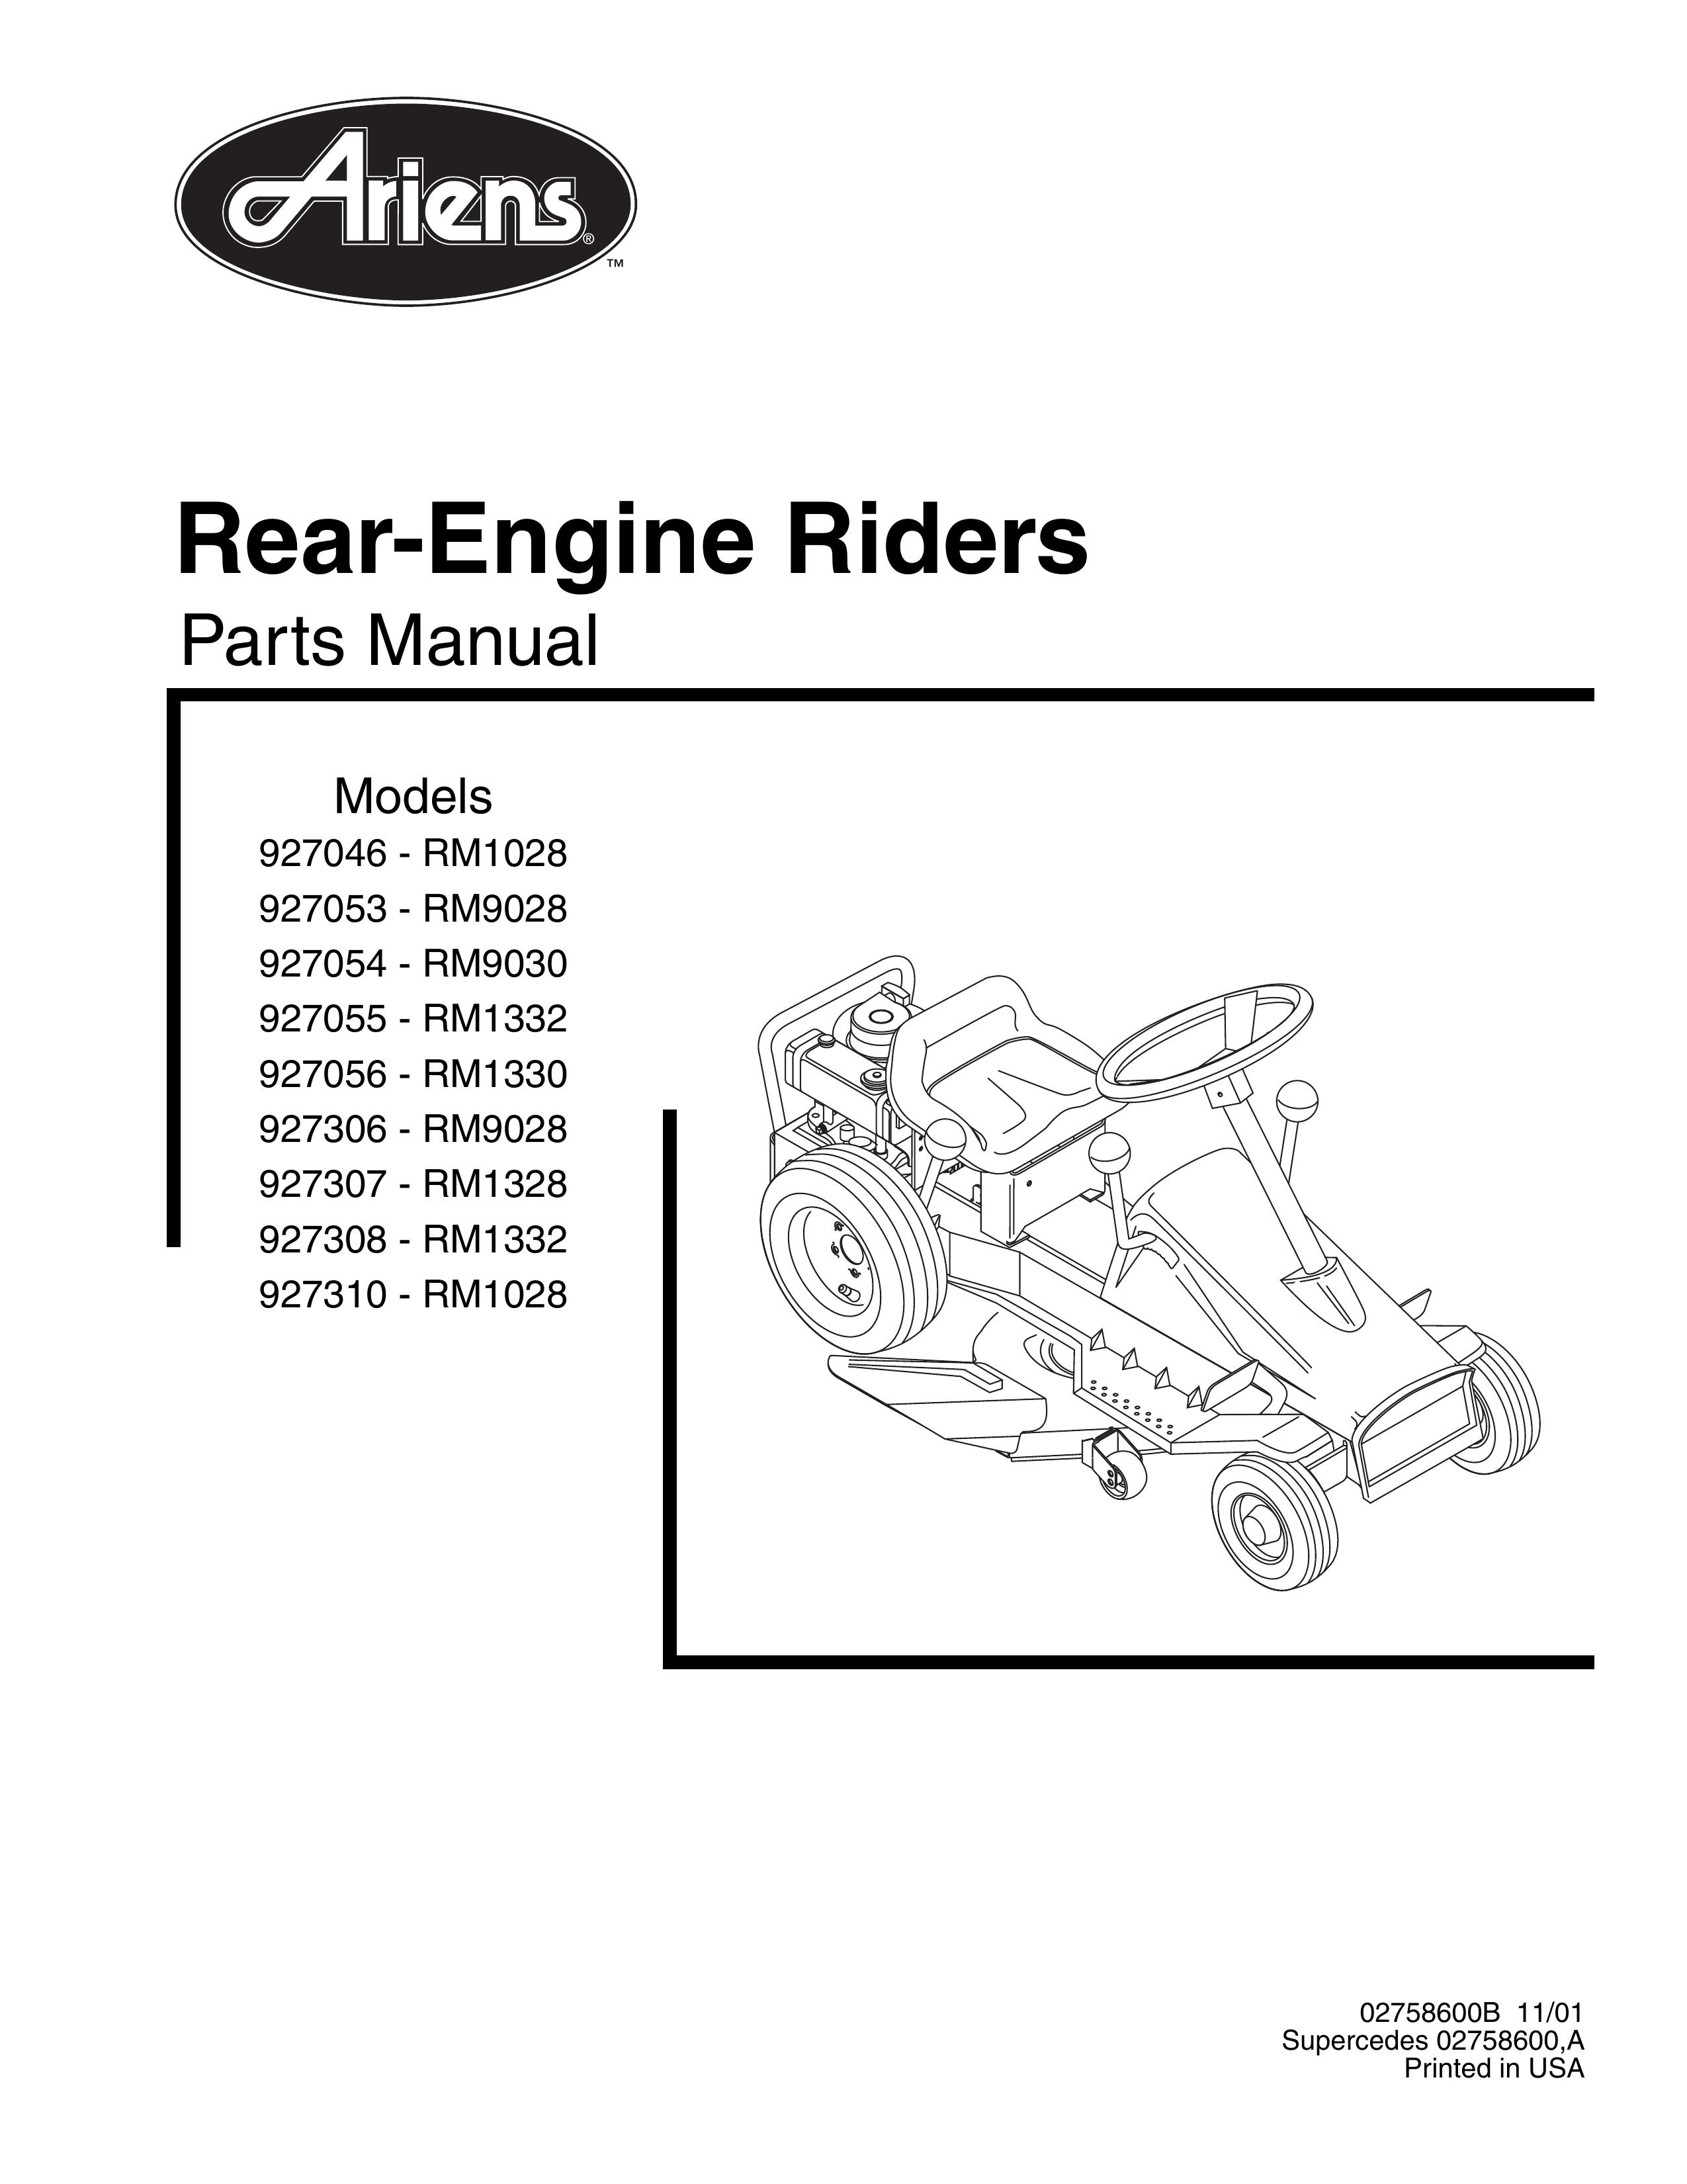 Ariens 927055 - RM1332 Camcorder User Manual